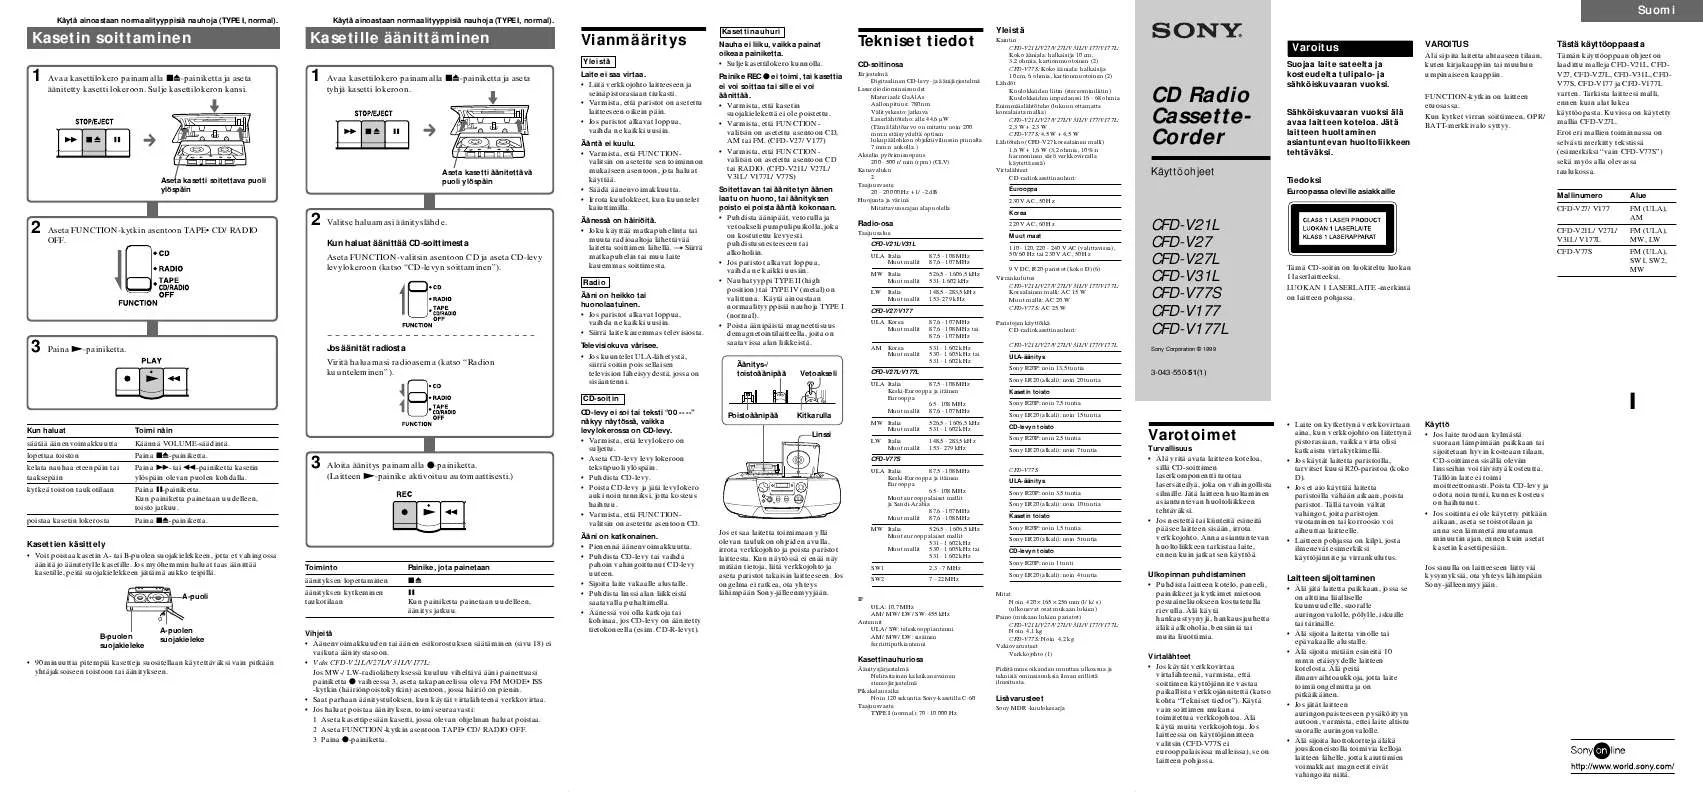 Mode d'emploi SONY CFD-V21L